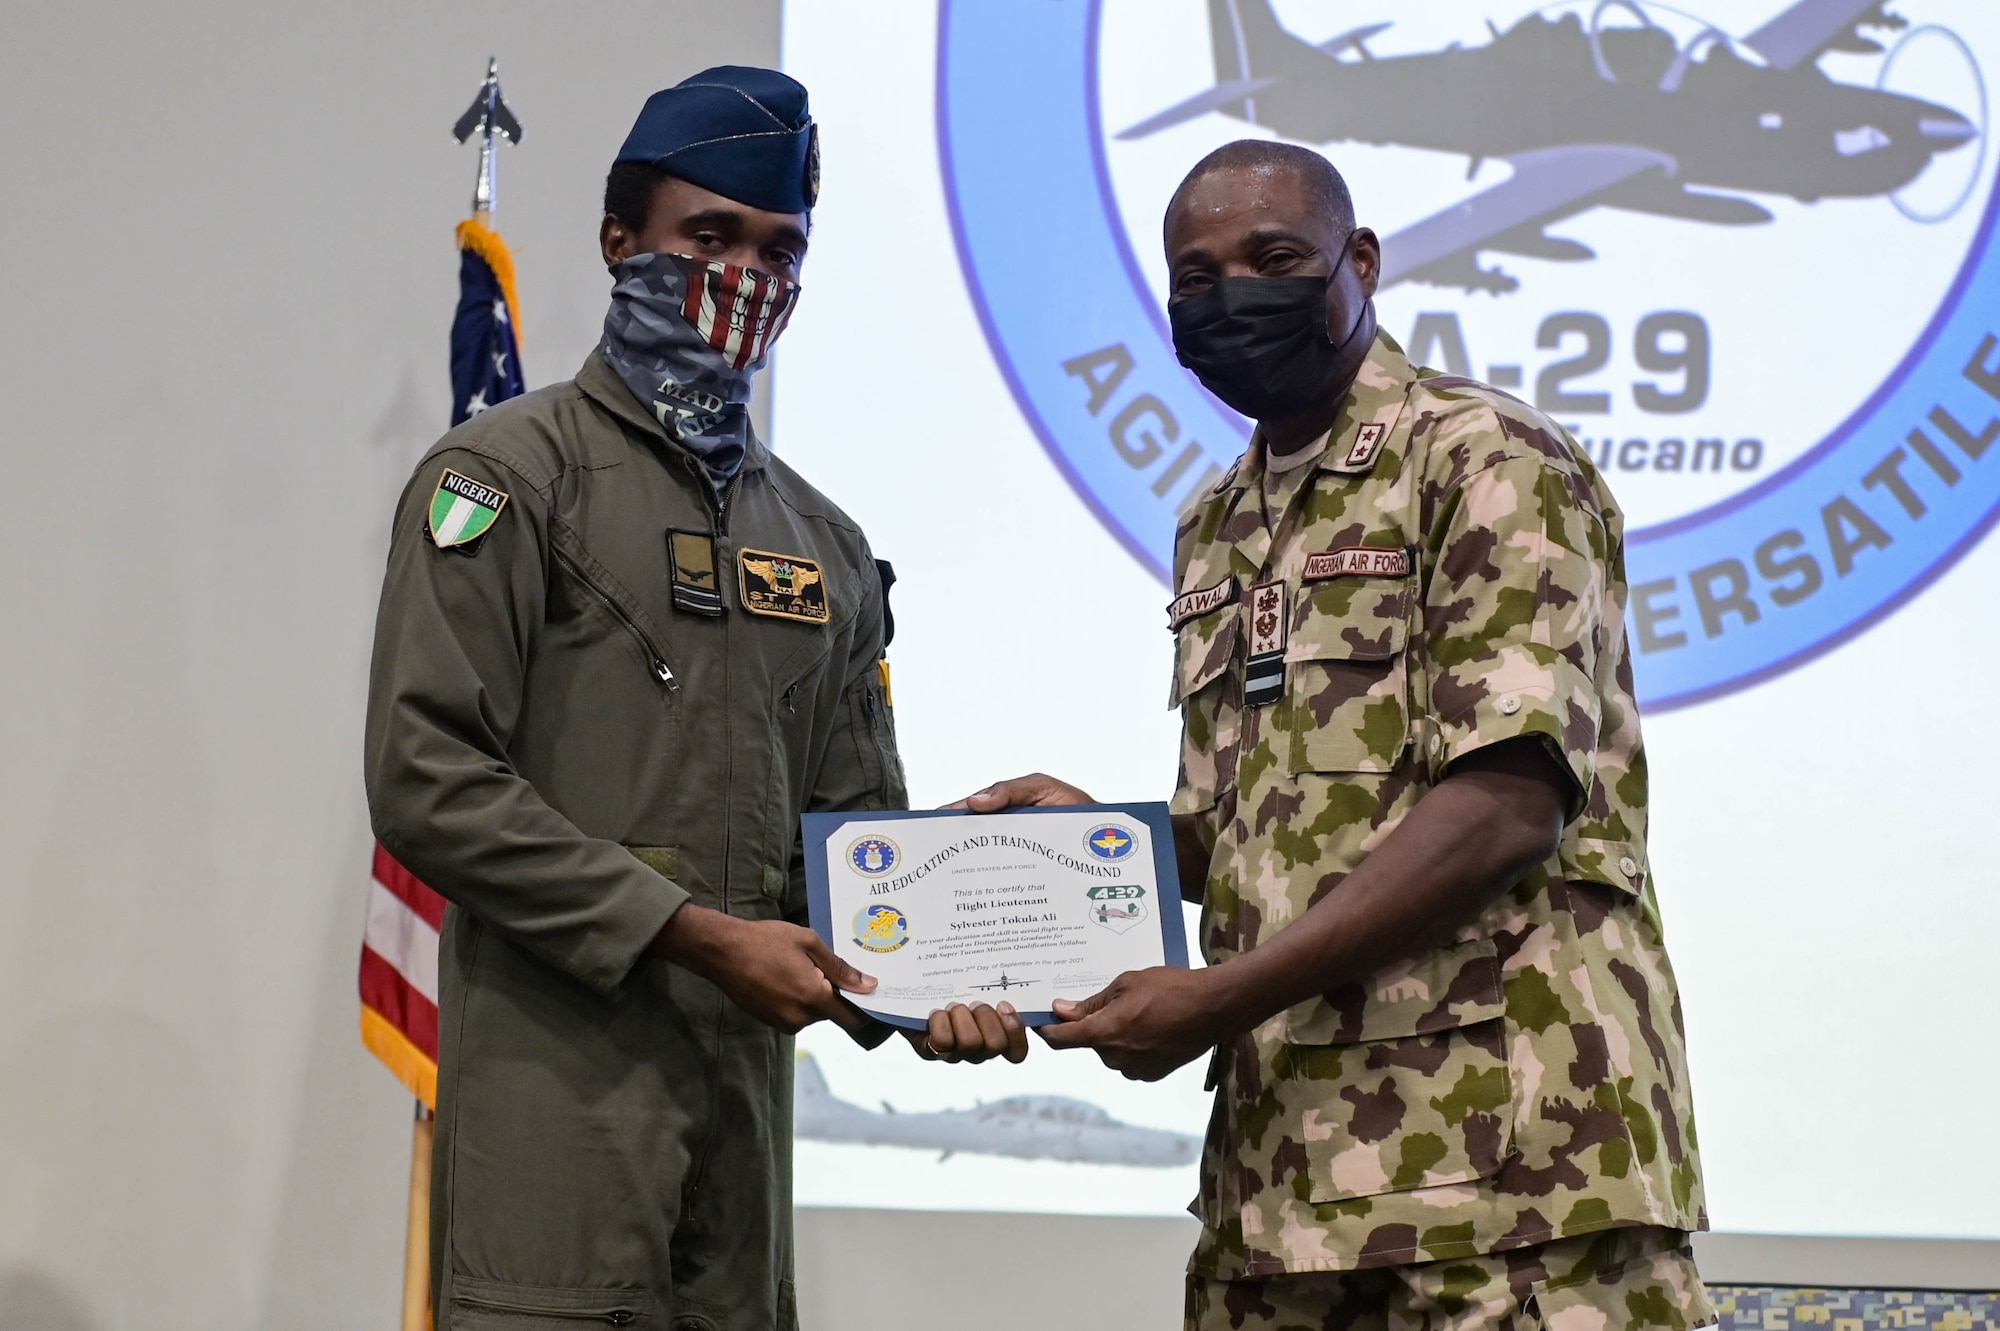 Nigerian Air Force Air Vice Marshal Sule Lawal, Nigerian A-29 program lead foreign liaison officer, right, recognizes Nigerian Air Force A-29 Super Tucano aircraft pilot, left, as a distinguished graduate for the mission qualification syllabus during the NAF A-29 pilot graduation ceremony at Moody Air Force Base, Georgia, Sept. 2, 2021. Upon graduating, the NAF pilots are qualified to strafe with two .50-caliber machine guns, shoot high explosive rockets, and drop both general purpose and laser guided bombs. (U.S. Air Force photo by Senior Airman Rebeckah Medeiros)